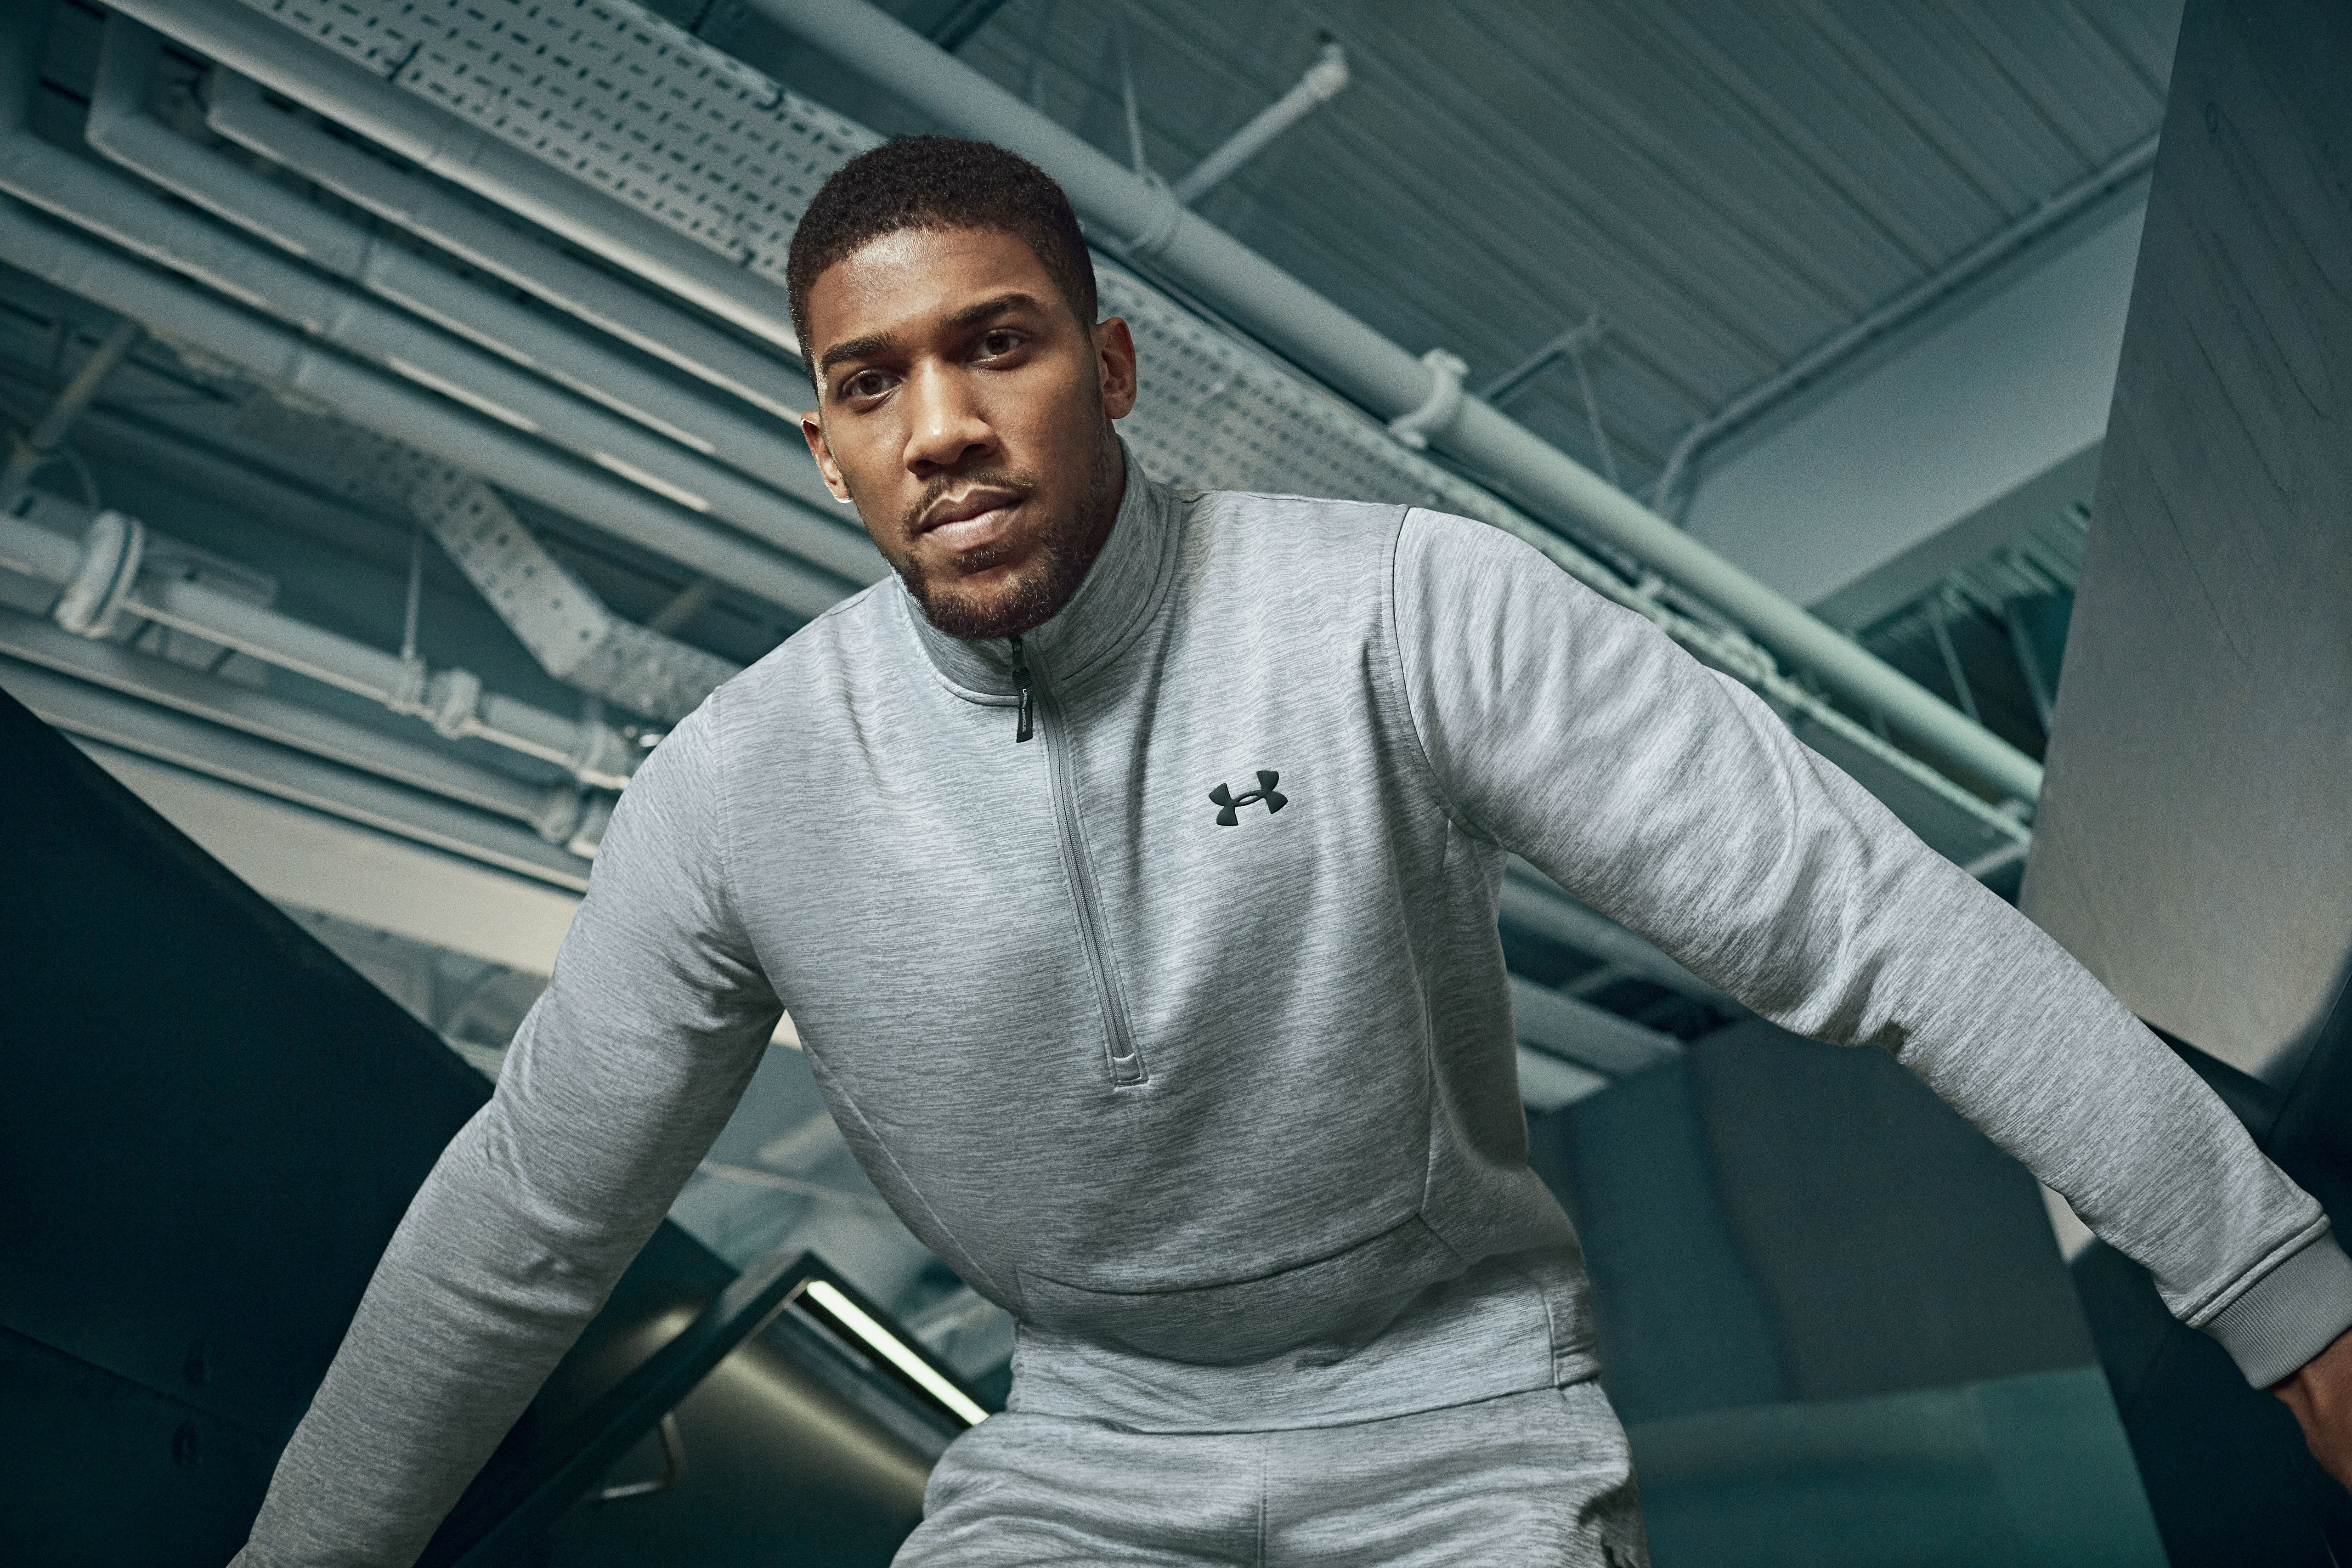 surf Subproducto Económico Under Armour Anthony Joshua - Olly Burn • we are CASEY - an artists agency